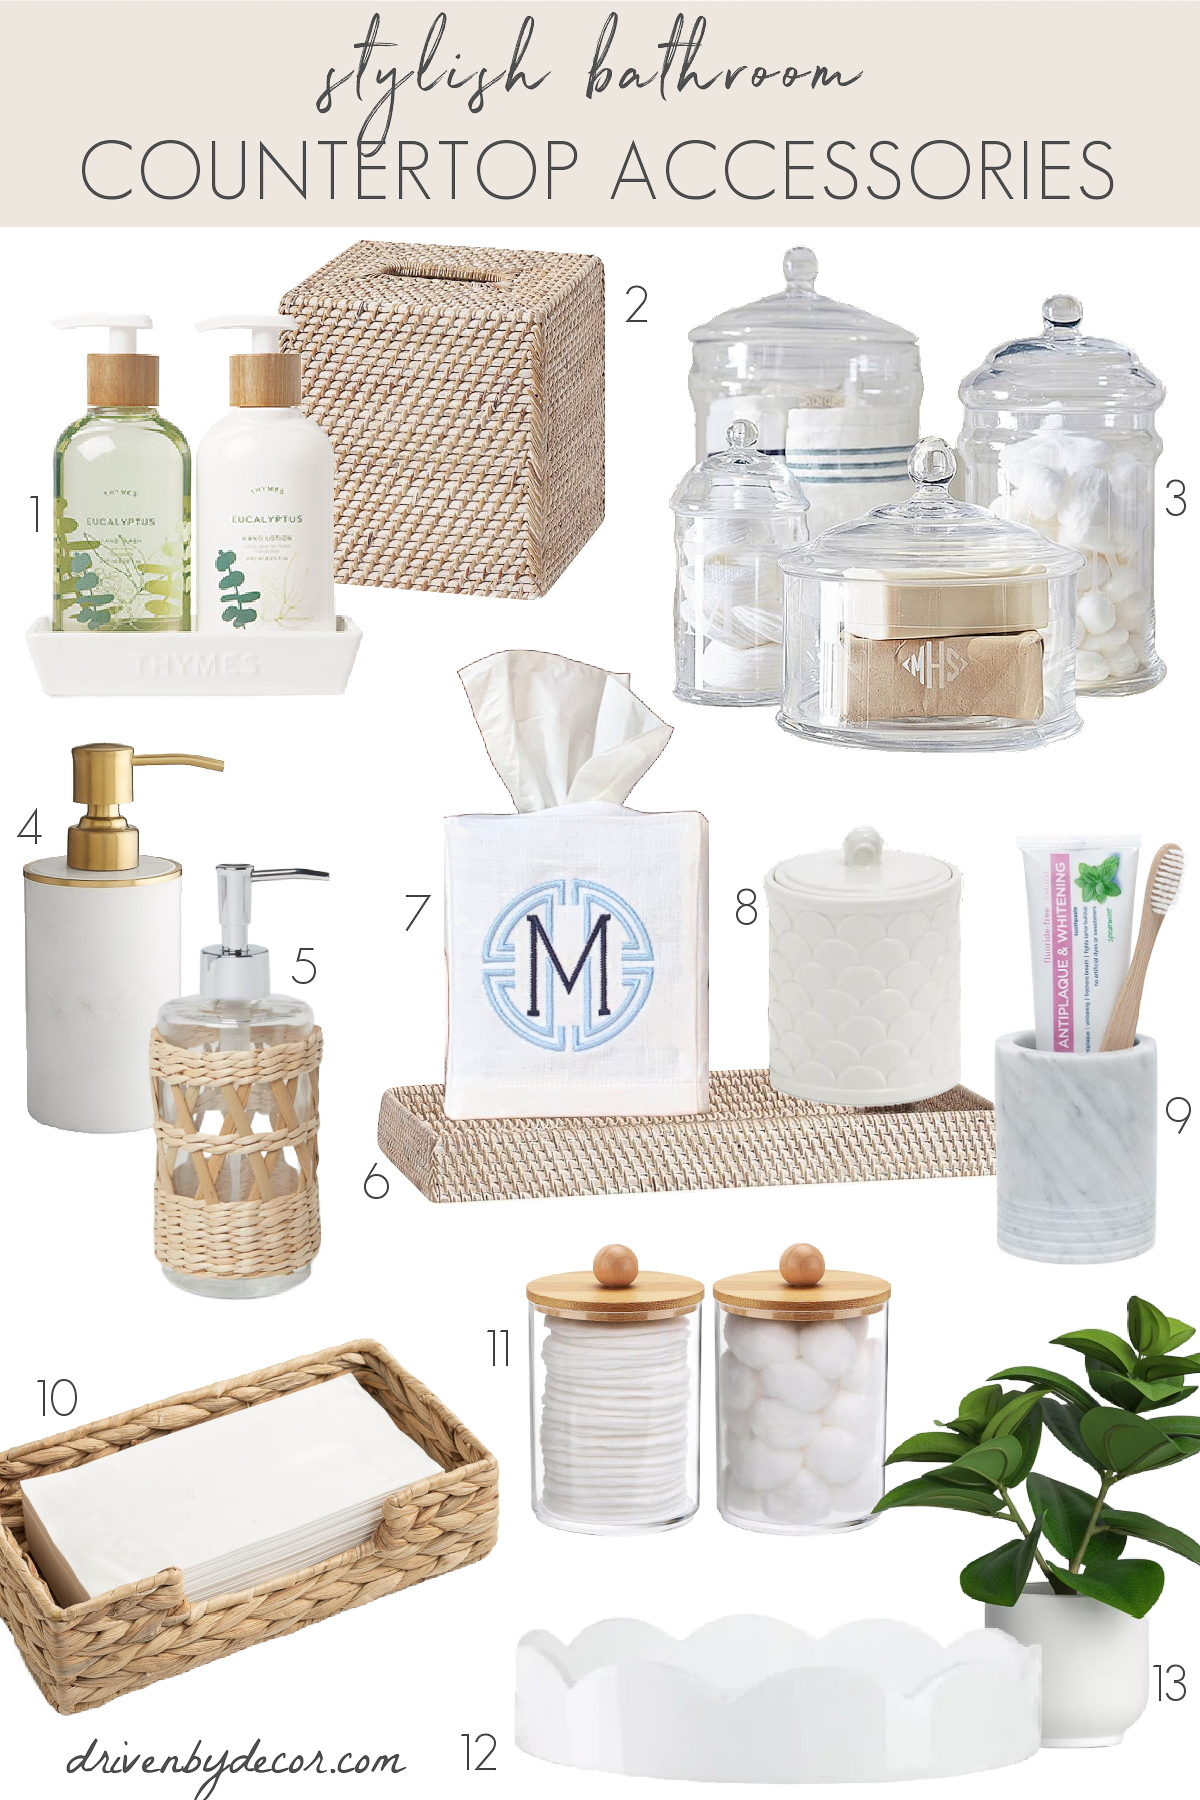 Bathroom decor ideas for your countertop including soap pumps, tissue boxes, trays, and more.